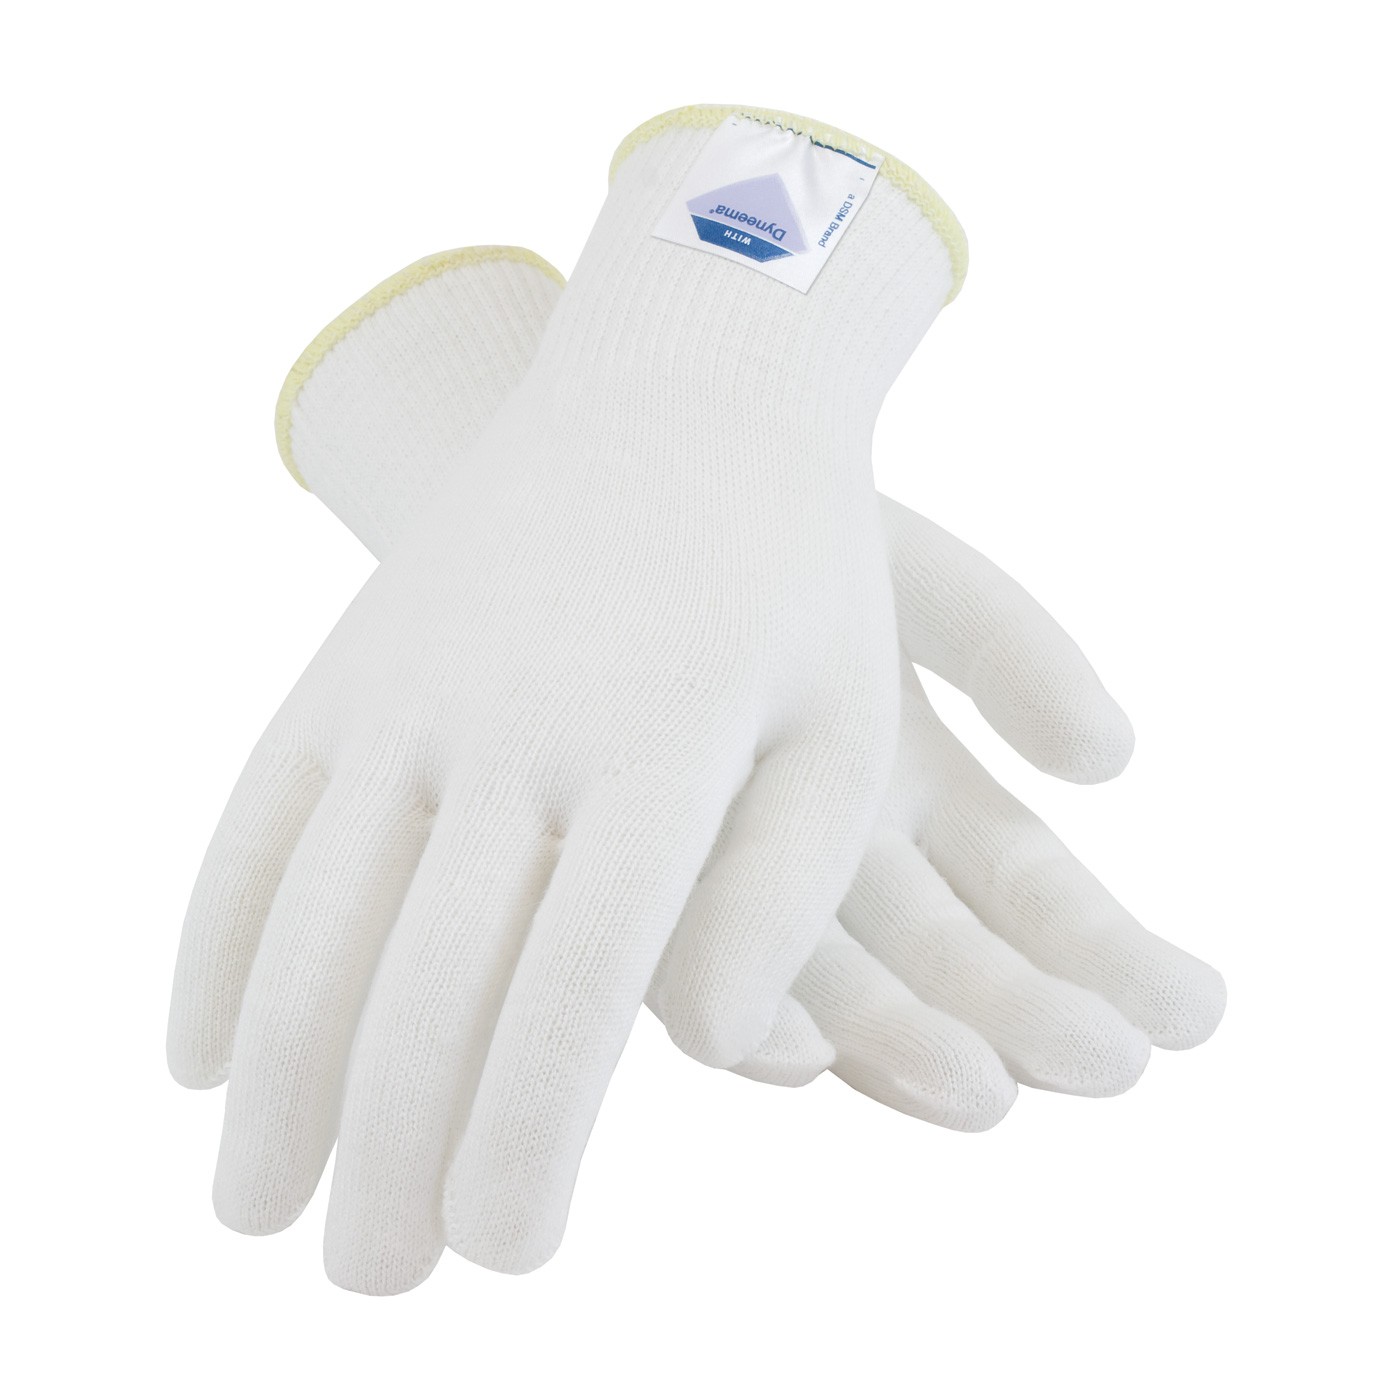 Gloves with Spun Dyneema, 13 Gauge, White, Light Weight, ANSI2 Size X-Small